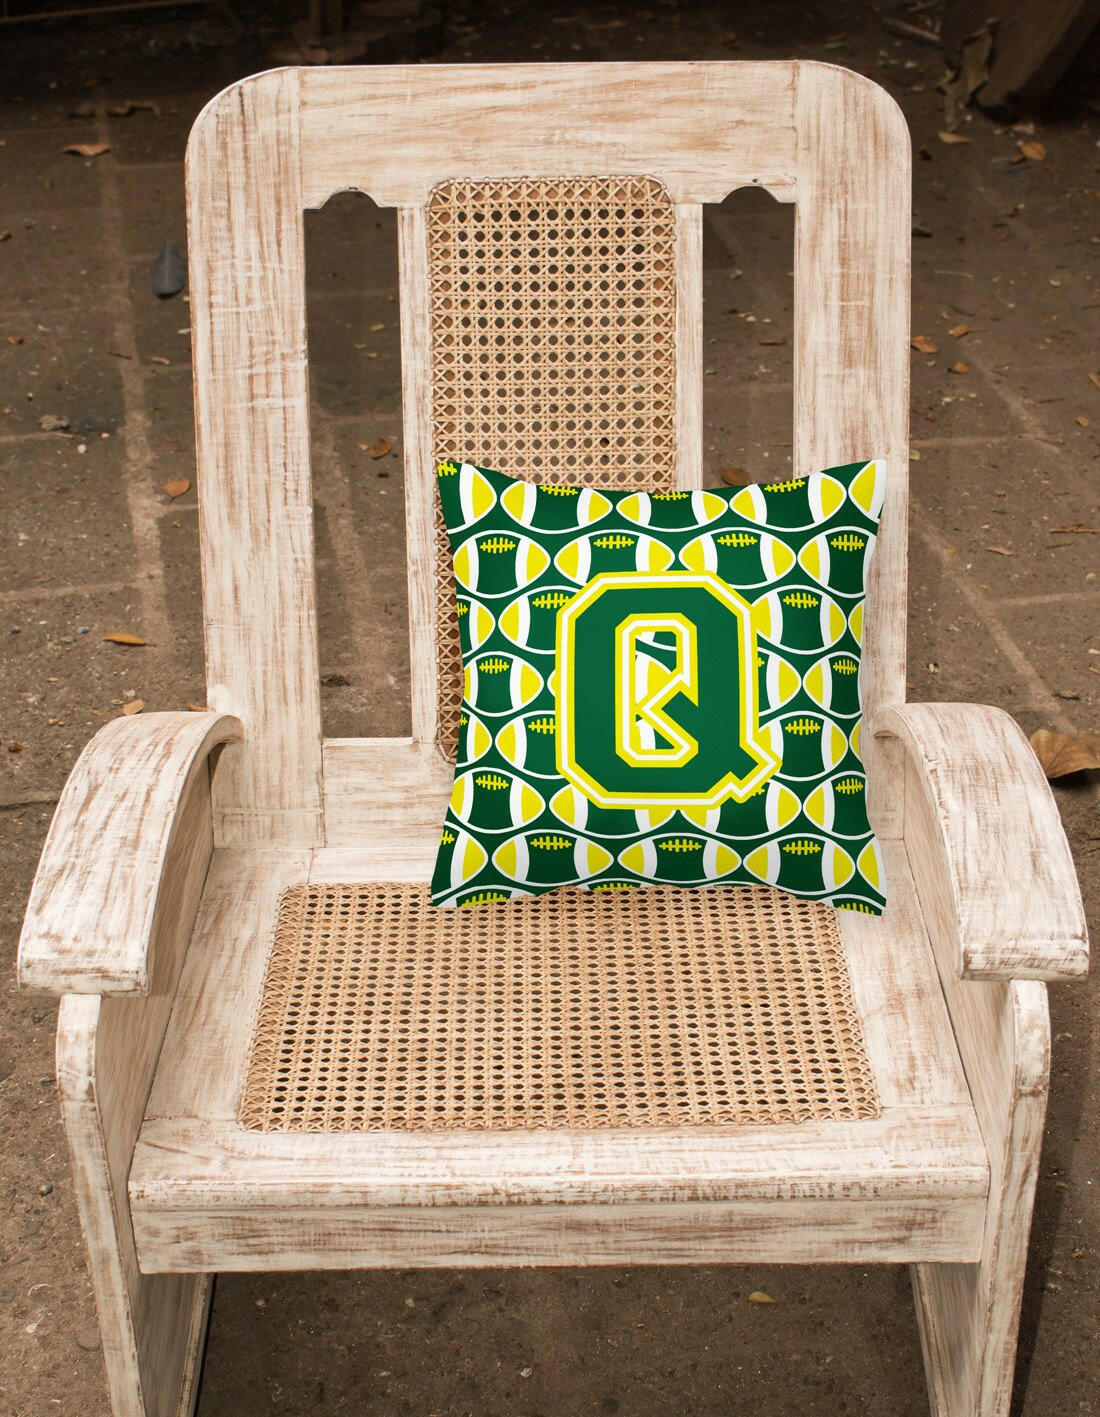 Letter Q Football Green and Yellow Fabric Decorative Pillow CJ1075-QPW1414 by Caroline's Treasures